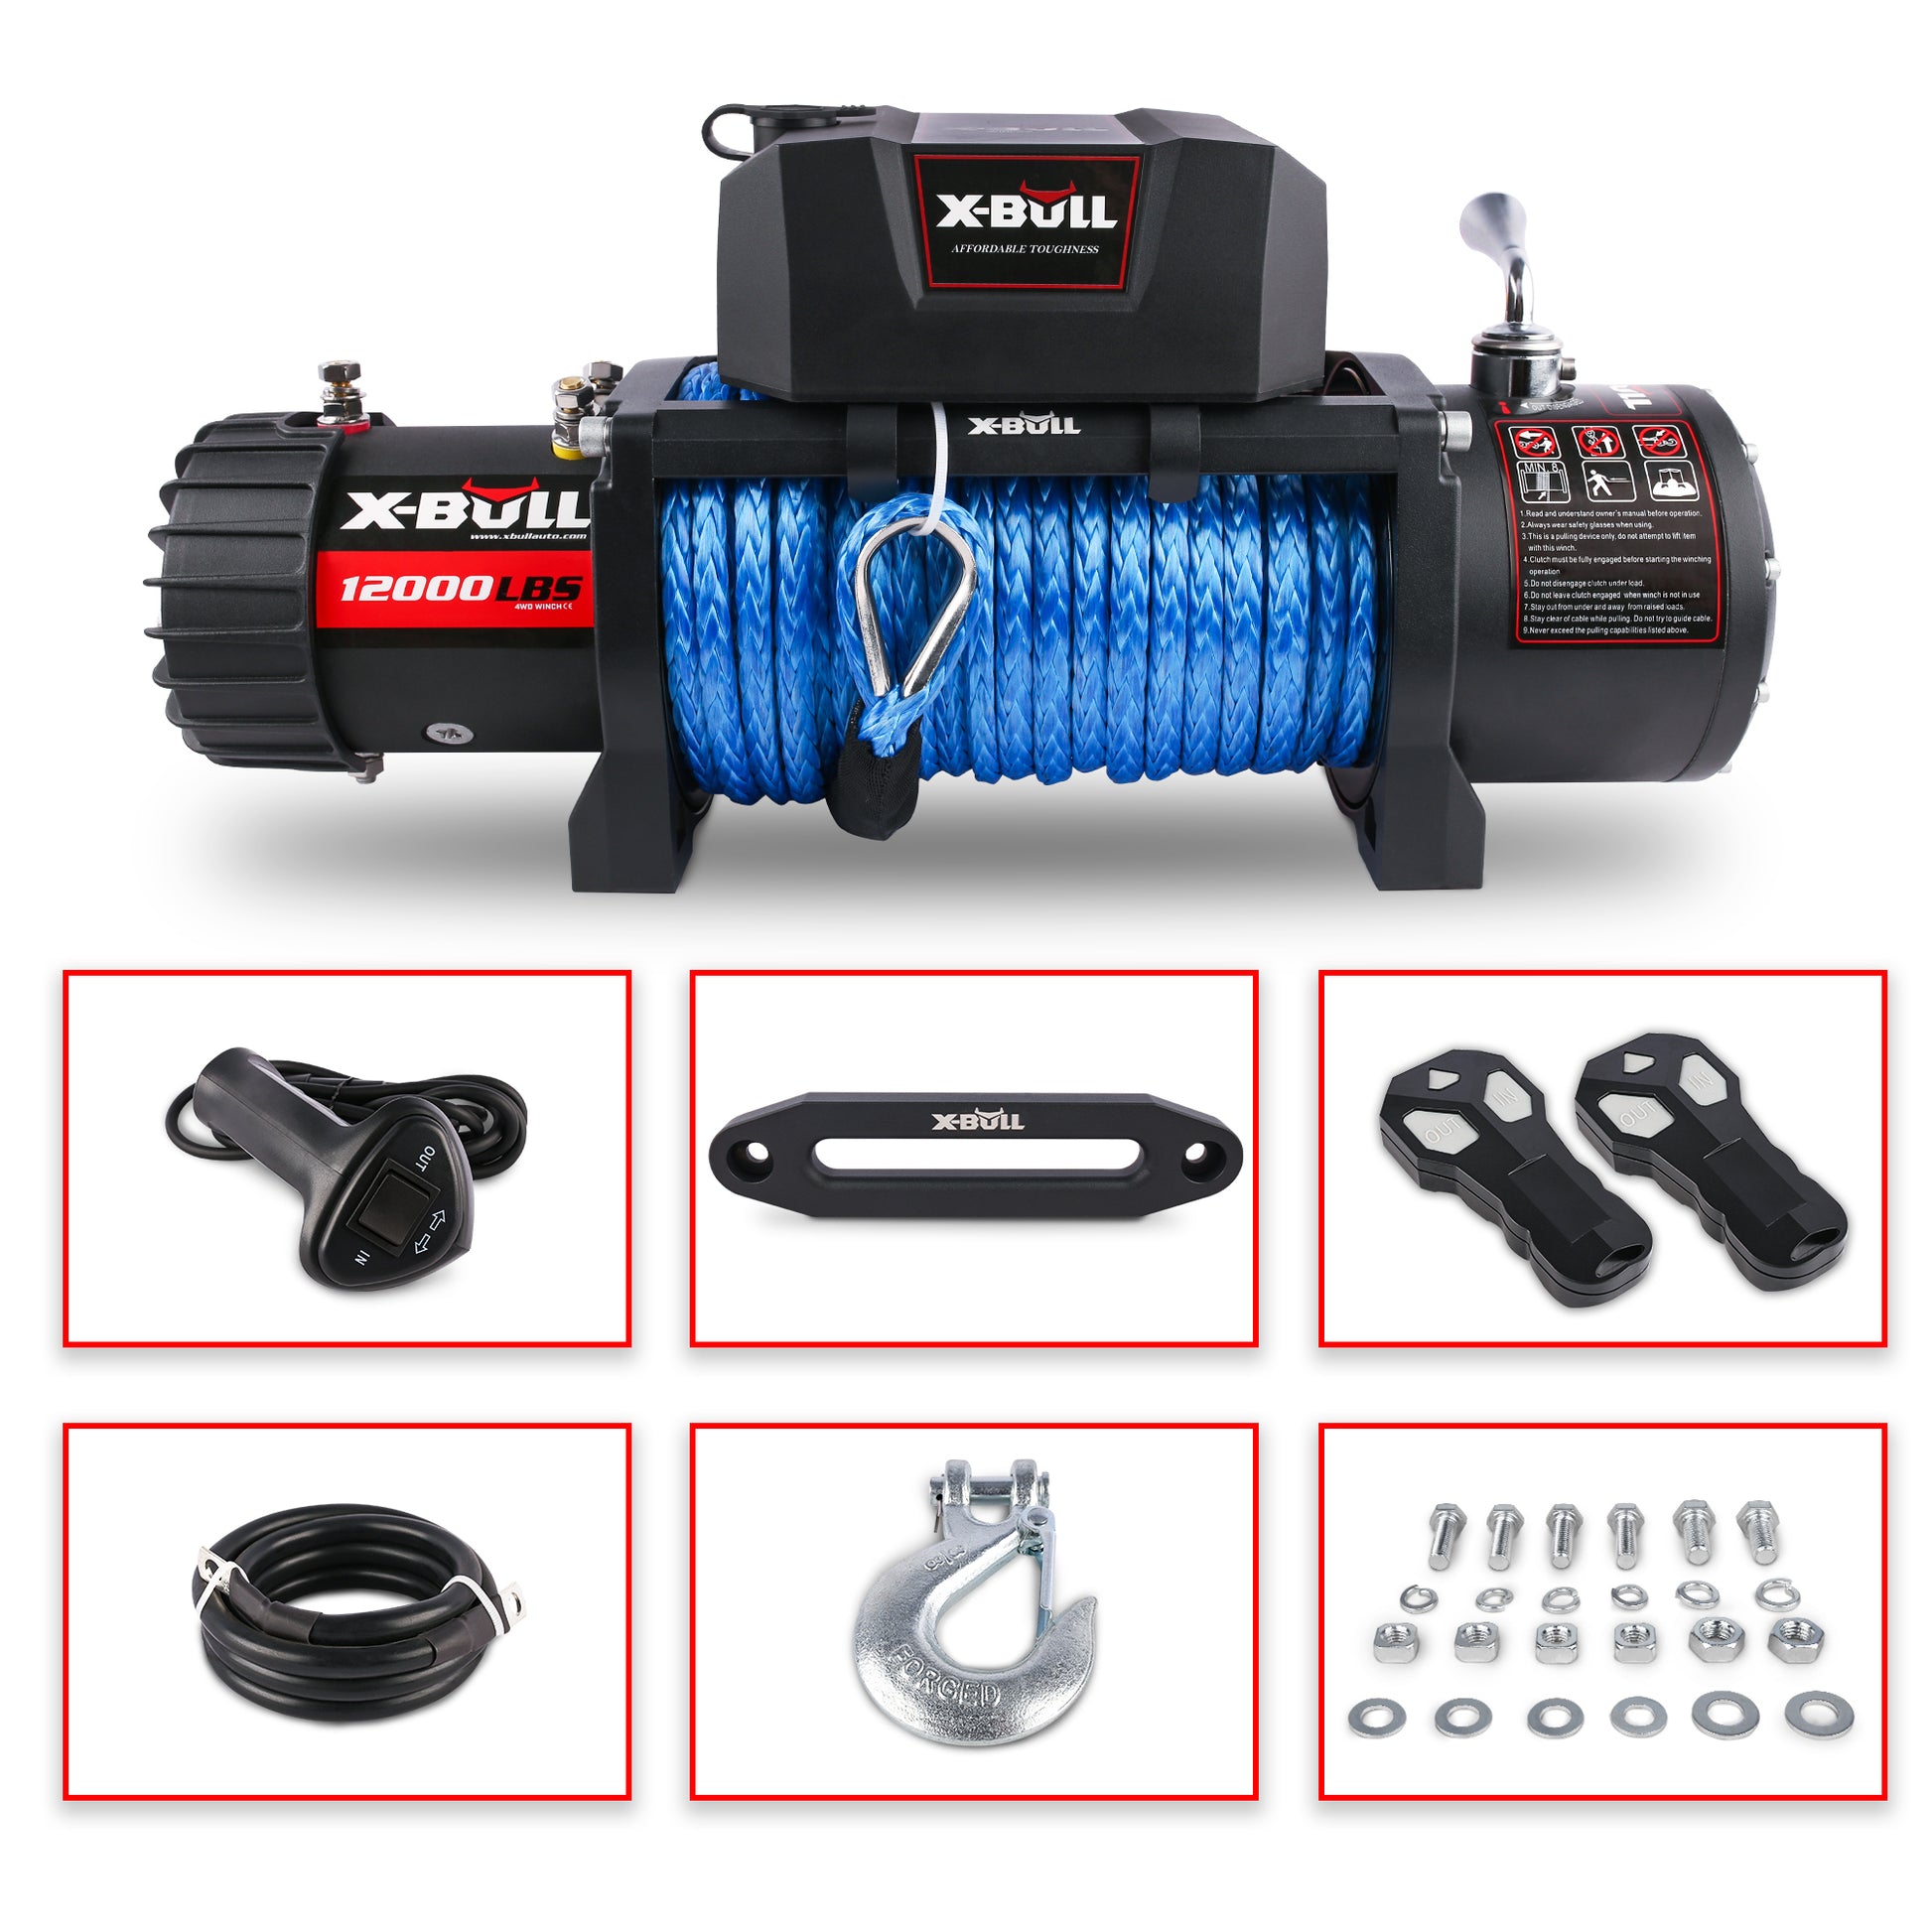 X BULL 12000 lbs Electric Winch Synthetic Rope Trailer black-stainless steel